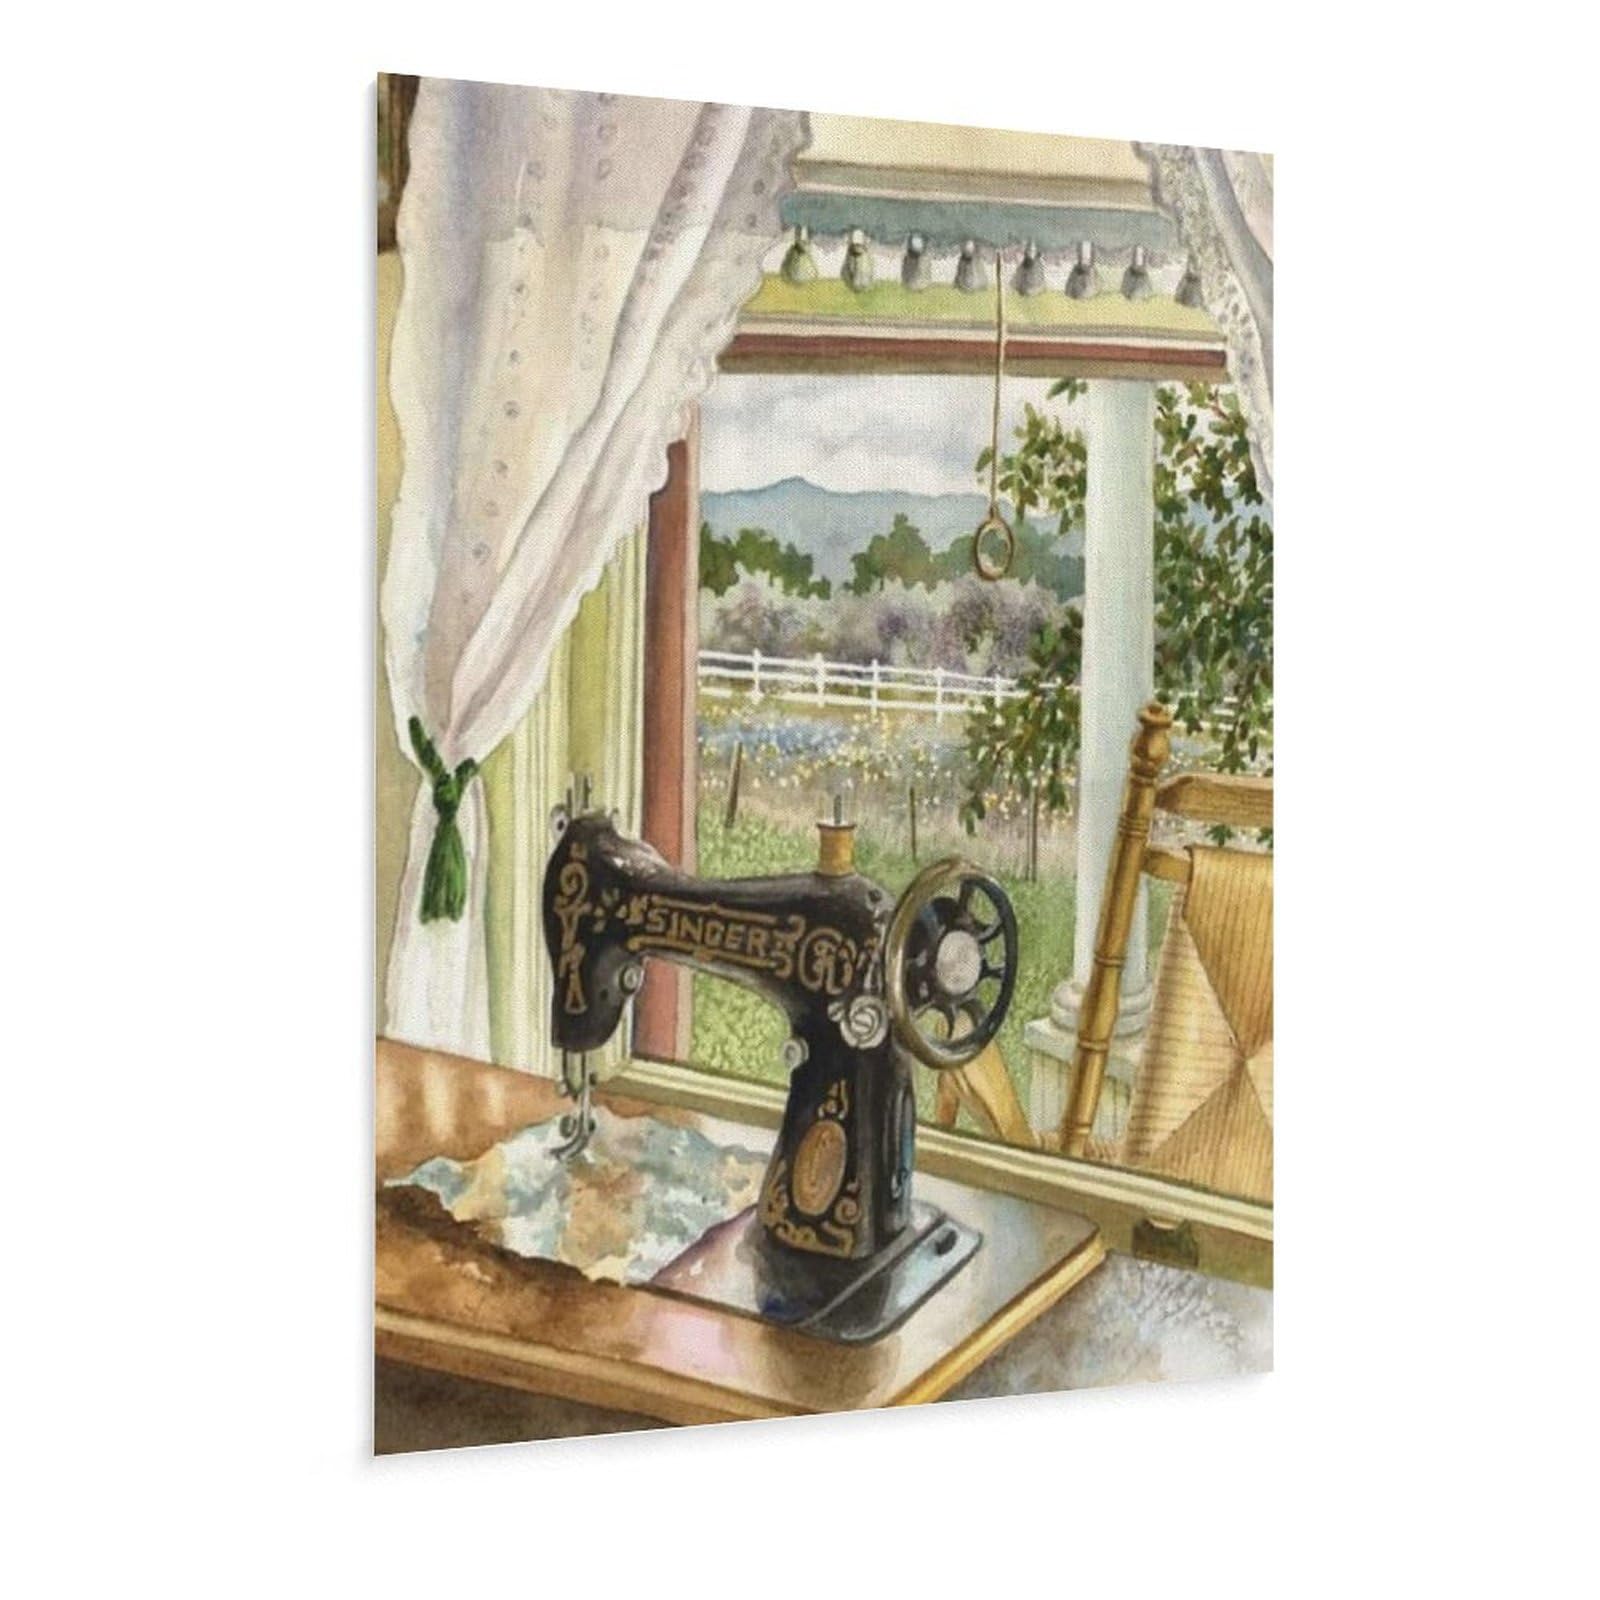 Posters Vintage Sewing Machine Art Poster Tailor's Gift Poster Canvas Art Posters Painting Pictures Wall Art Prints Wall Decor for Bedroom Home Office Decor Party Gifts 8x10inch(20x26cm) Unframe-sty